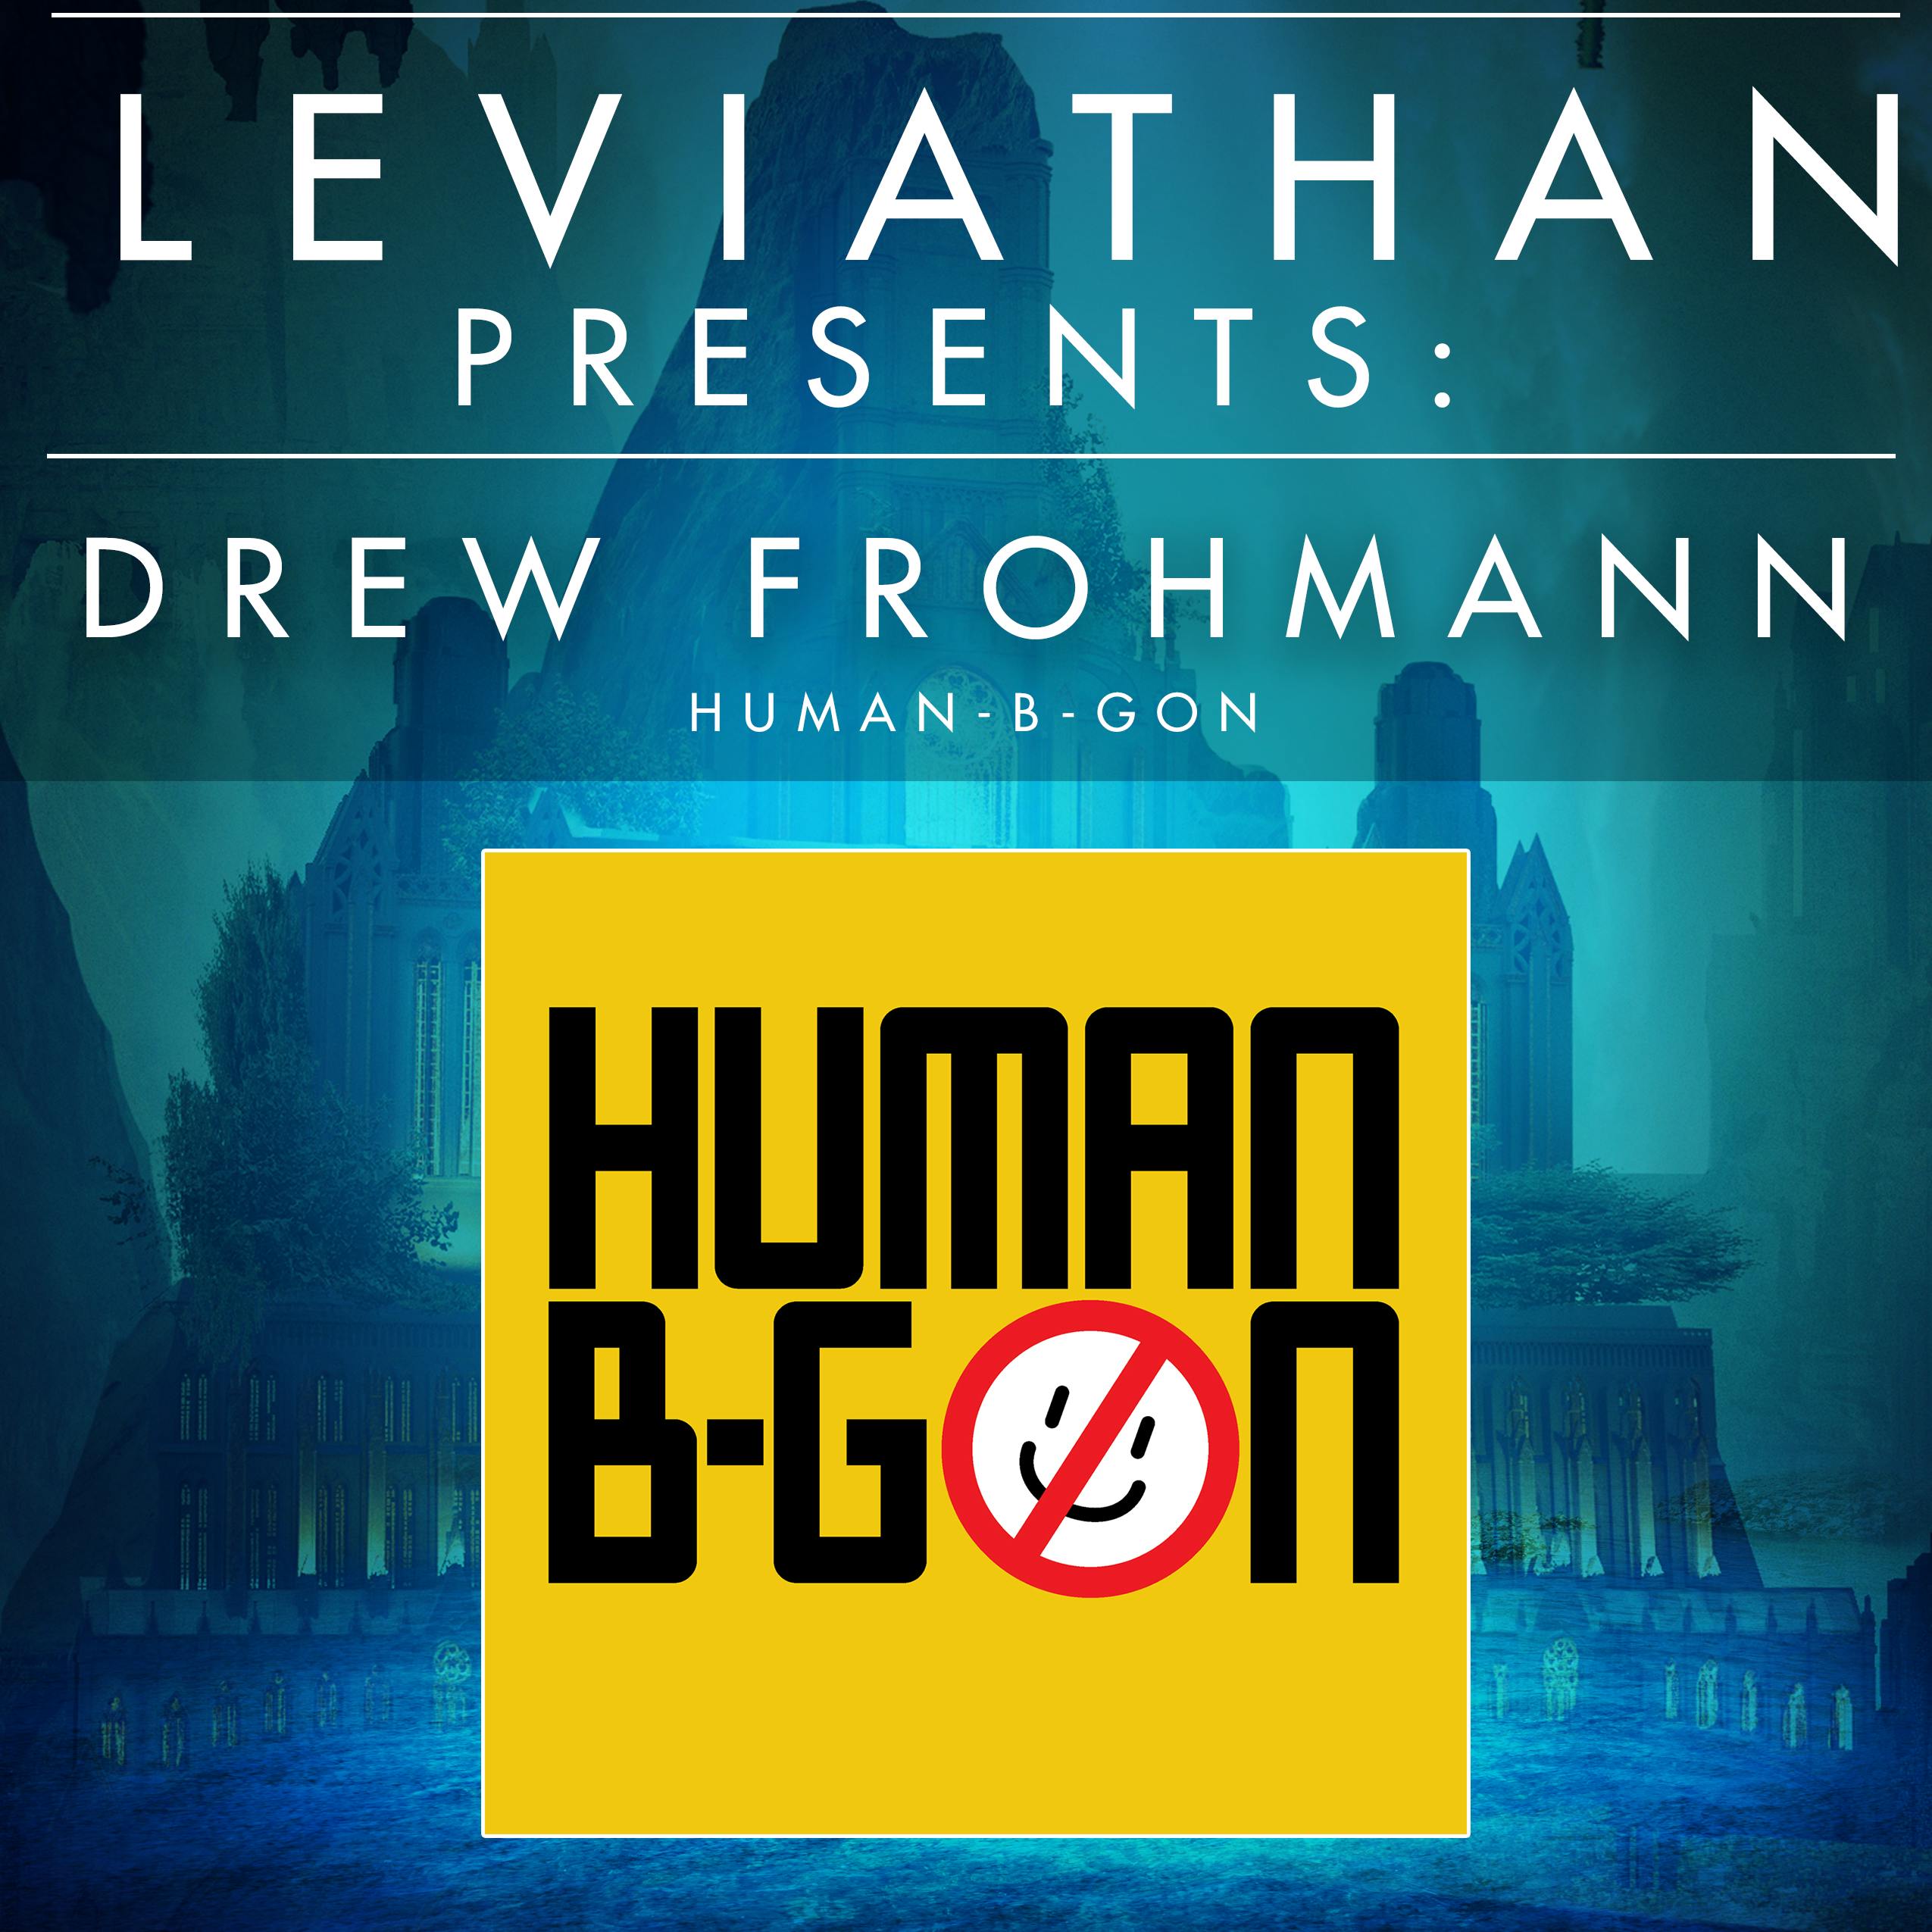 Leviathan Presents | Human-B-Gon by Drew Frohmann